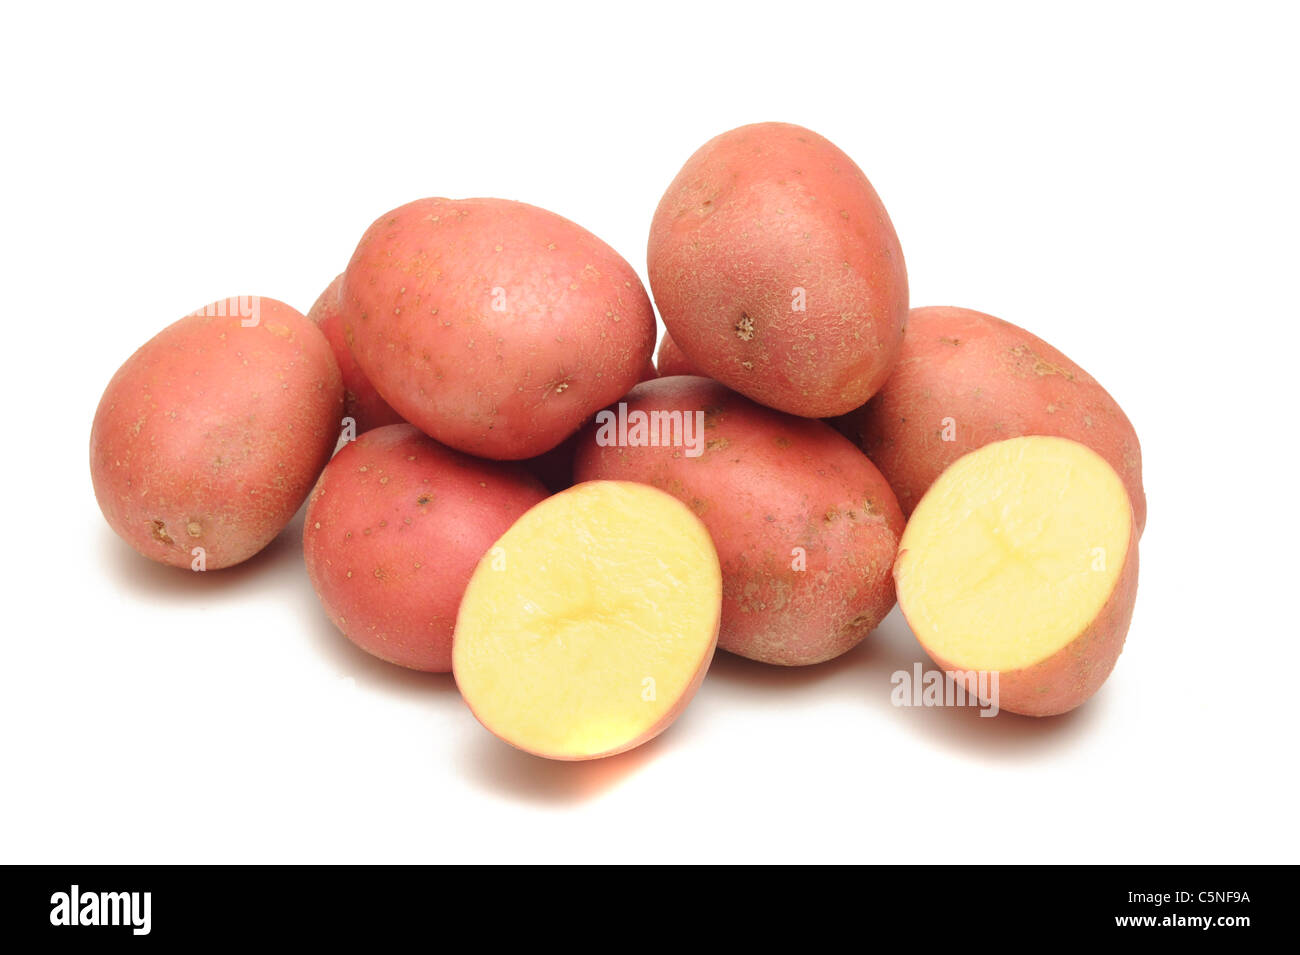 Photograph of red potatoes Stock Photo